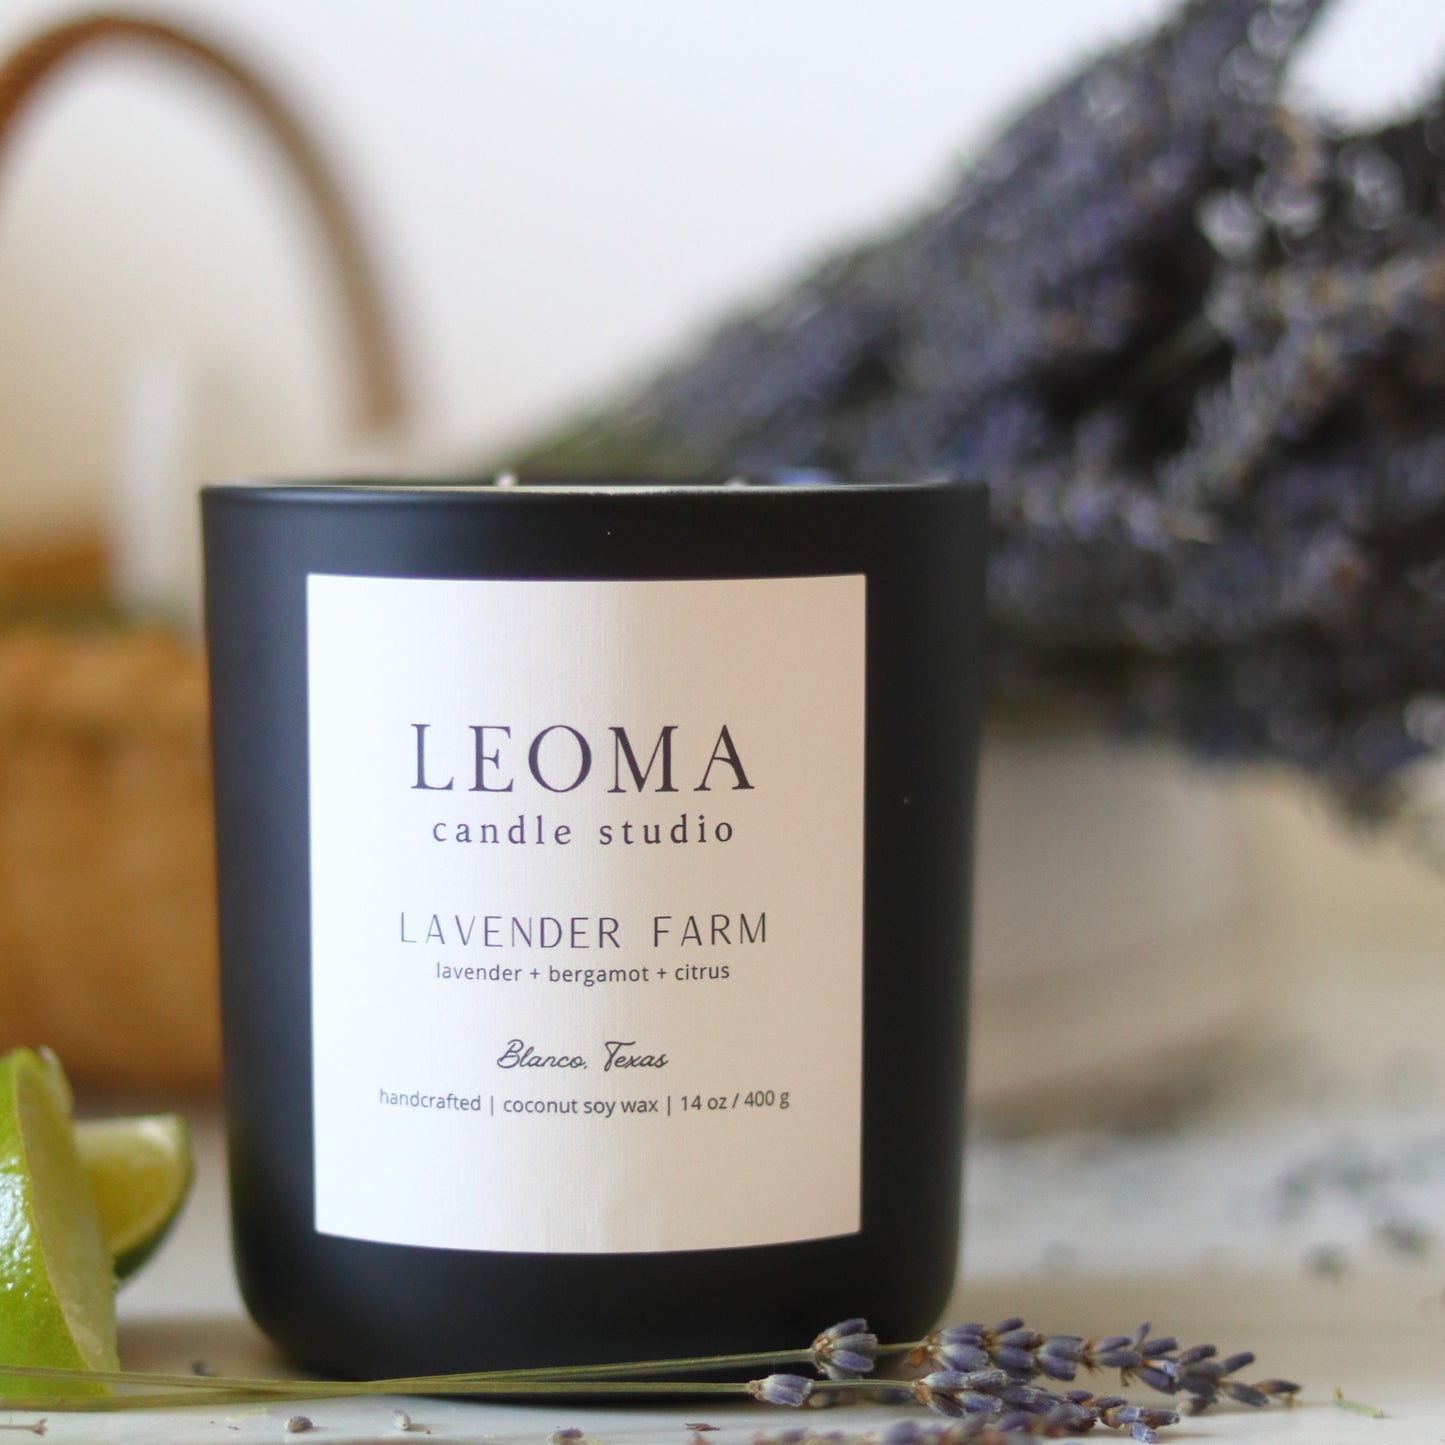 Handcrafted eco-friendly scented candle. Natural coconut & soy wax, toxin-free, 100% cotton wicks. Black vessel. Lavender Farm classic scented.